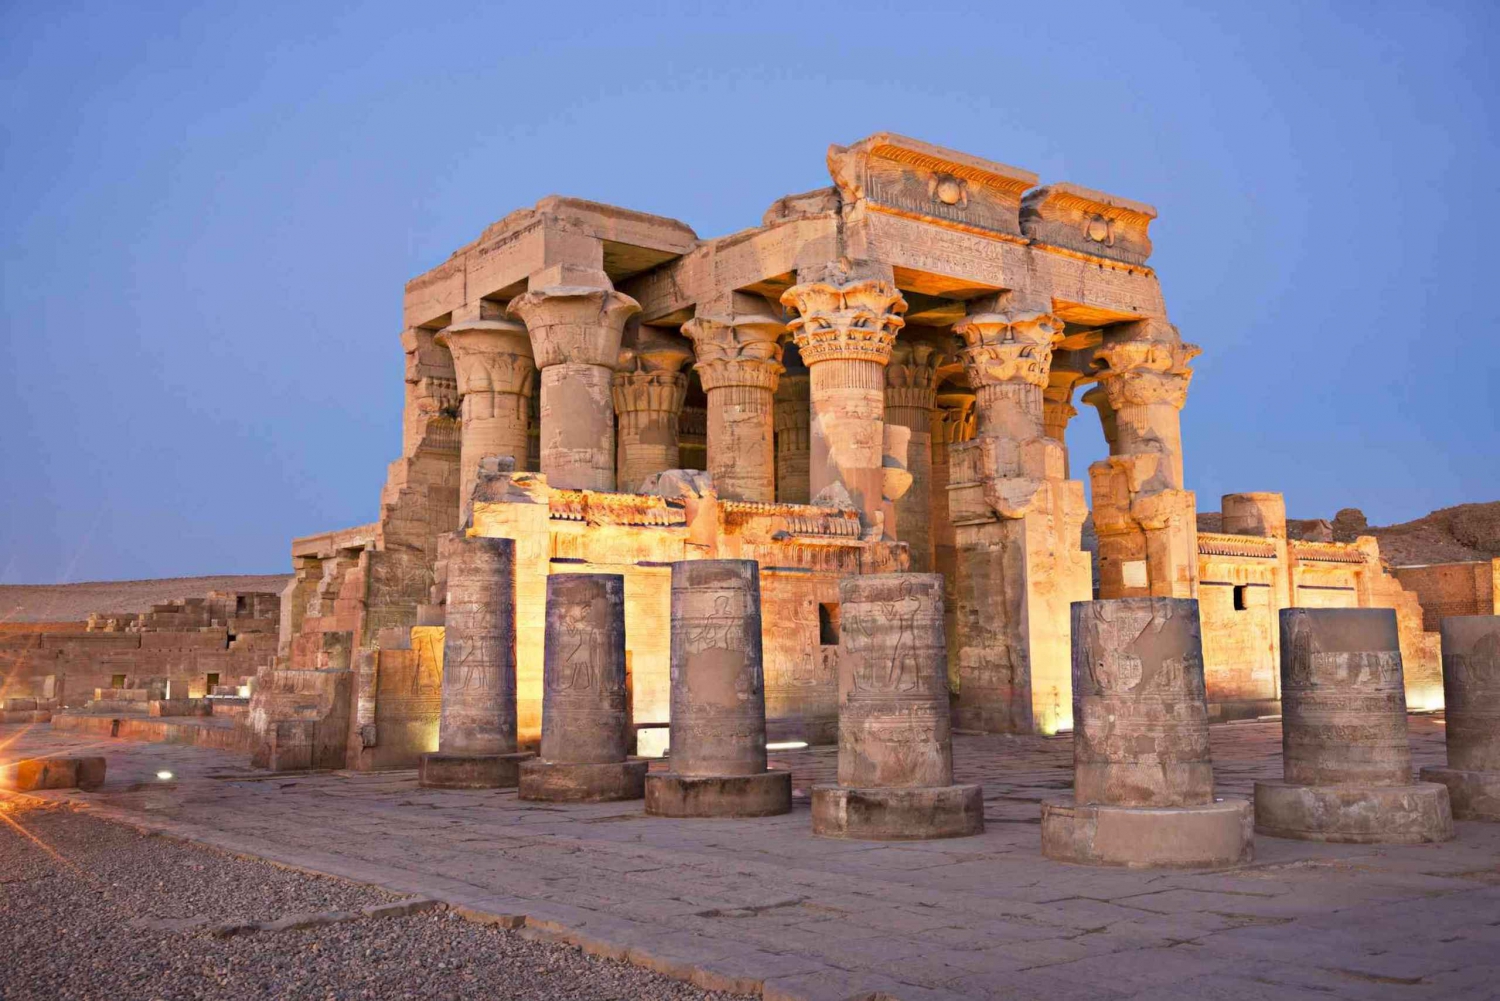 From Cairo: 1-Night Nile cruise to Luxor by Flights